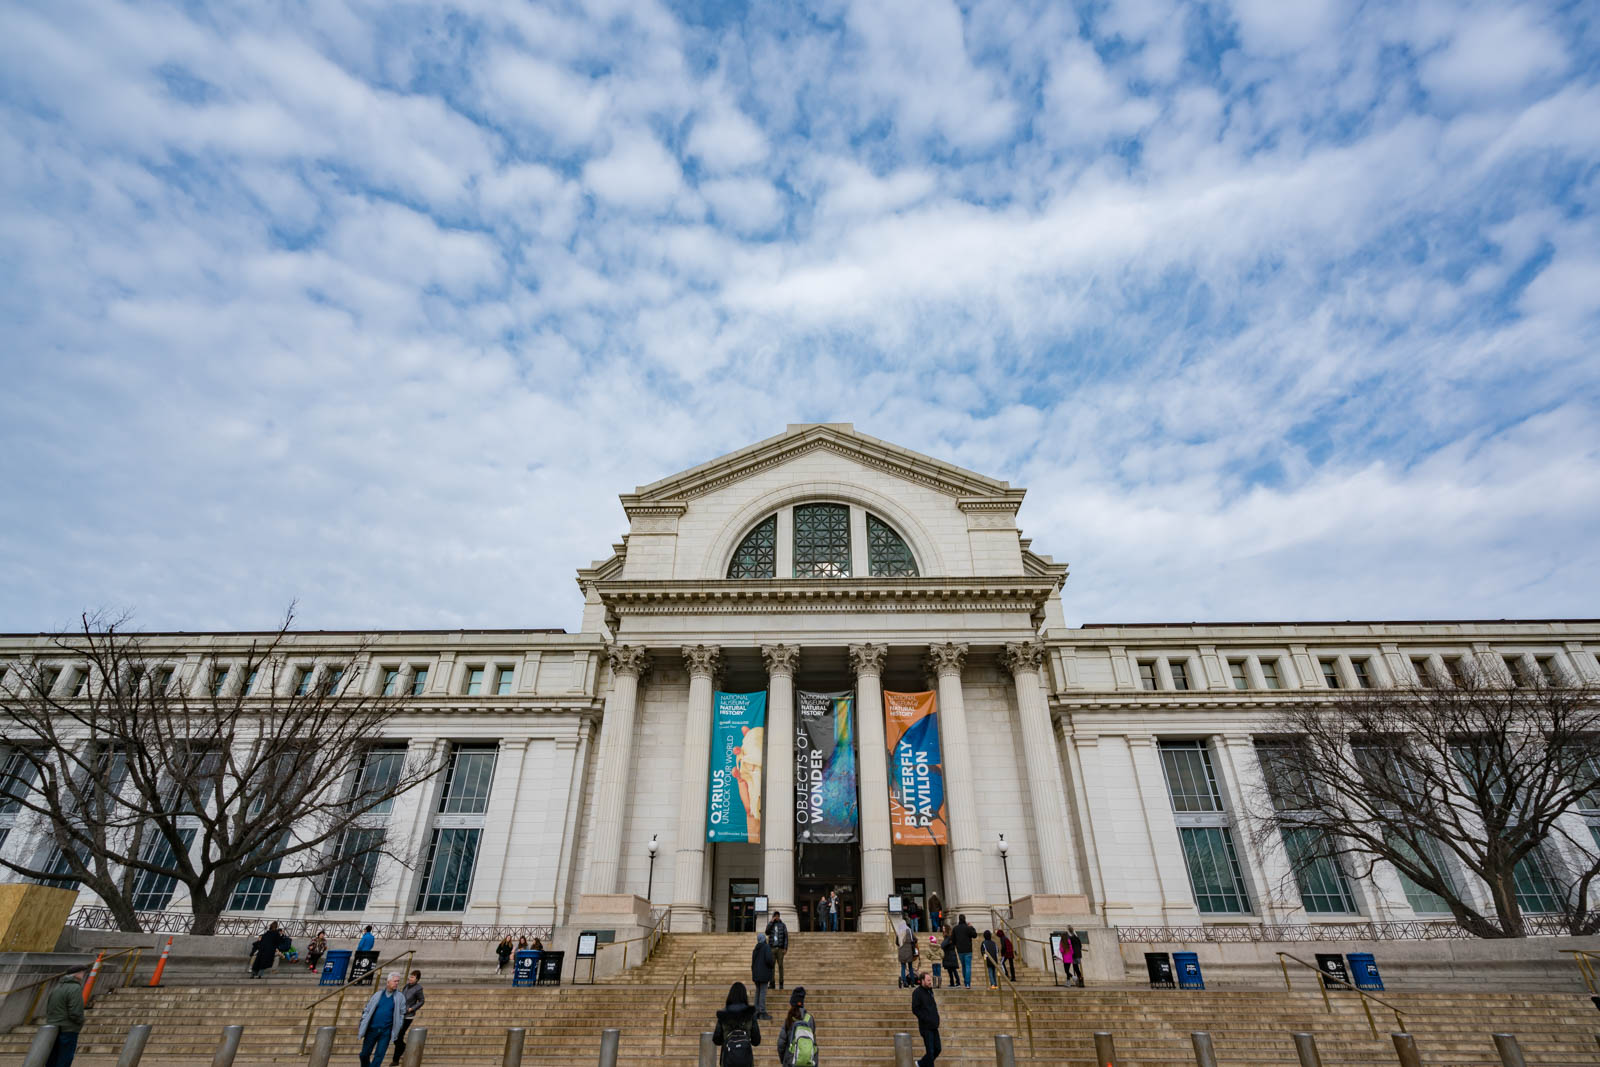 Things to do in Washington DC visit the Smithsonian National Museum of Natural History